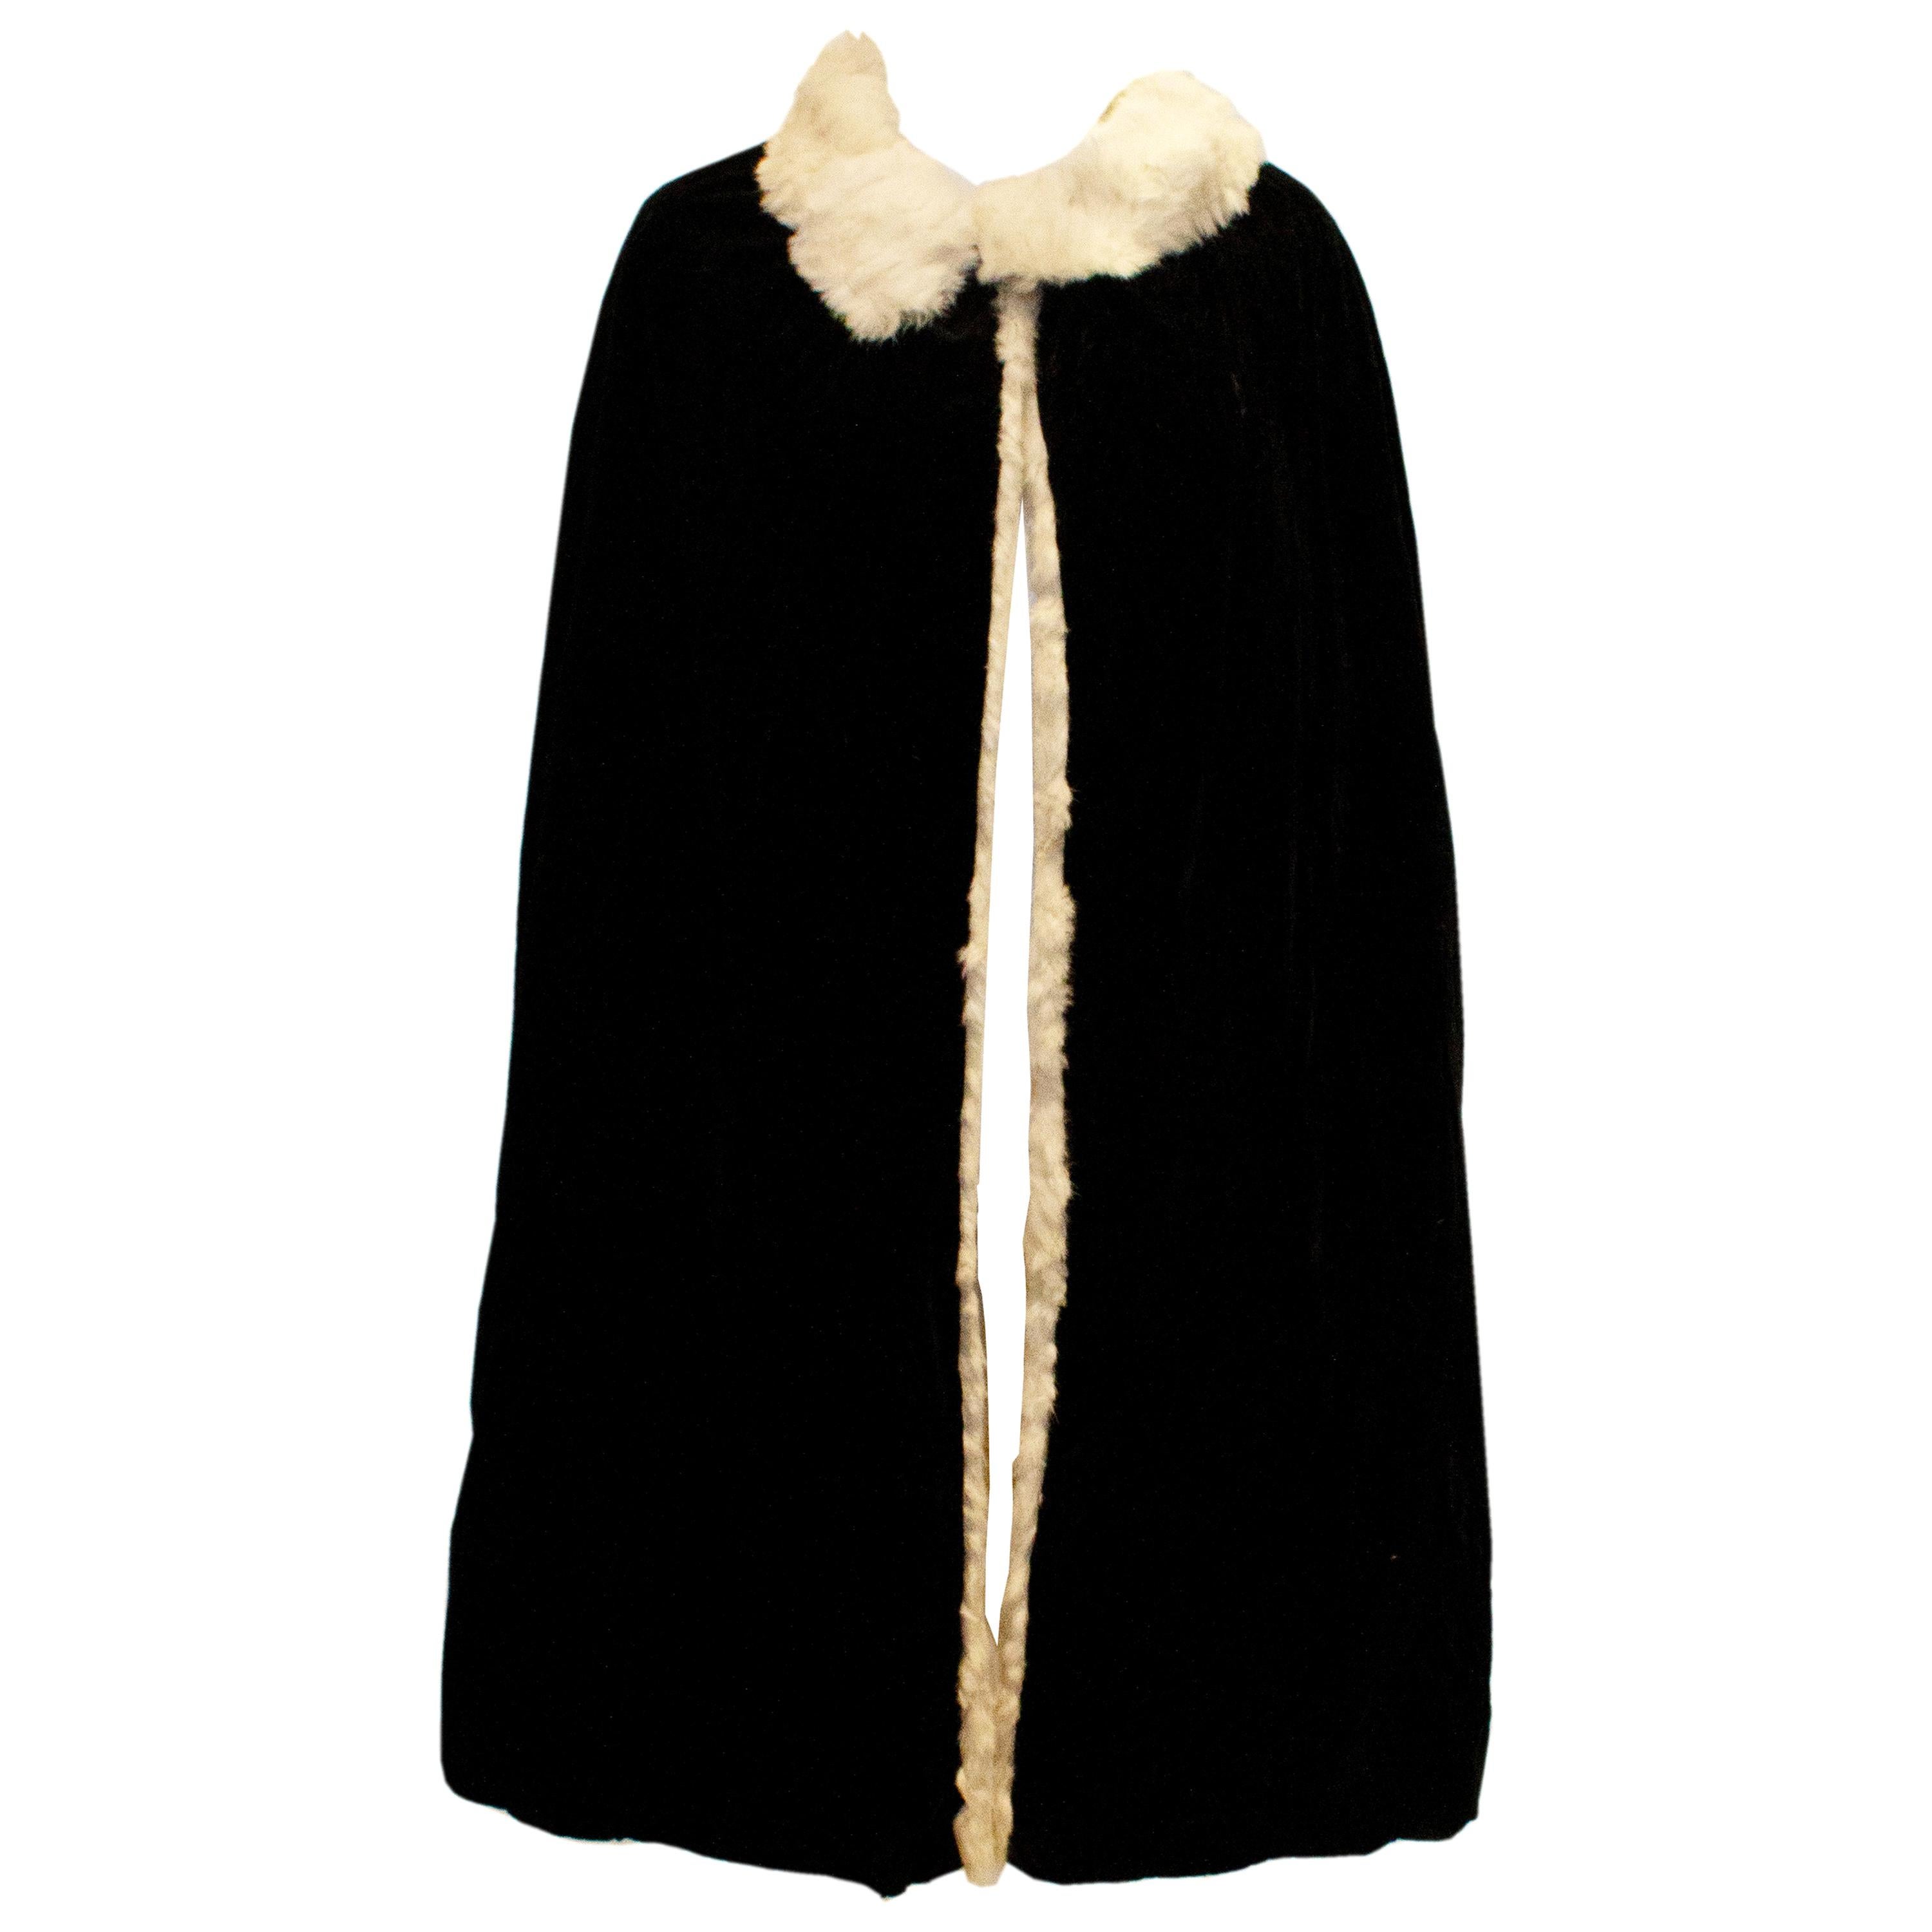 Vintage Marshall and Snelgrove Black Velvet Cape with Fur Lining. For Sale